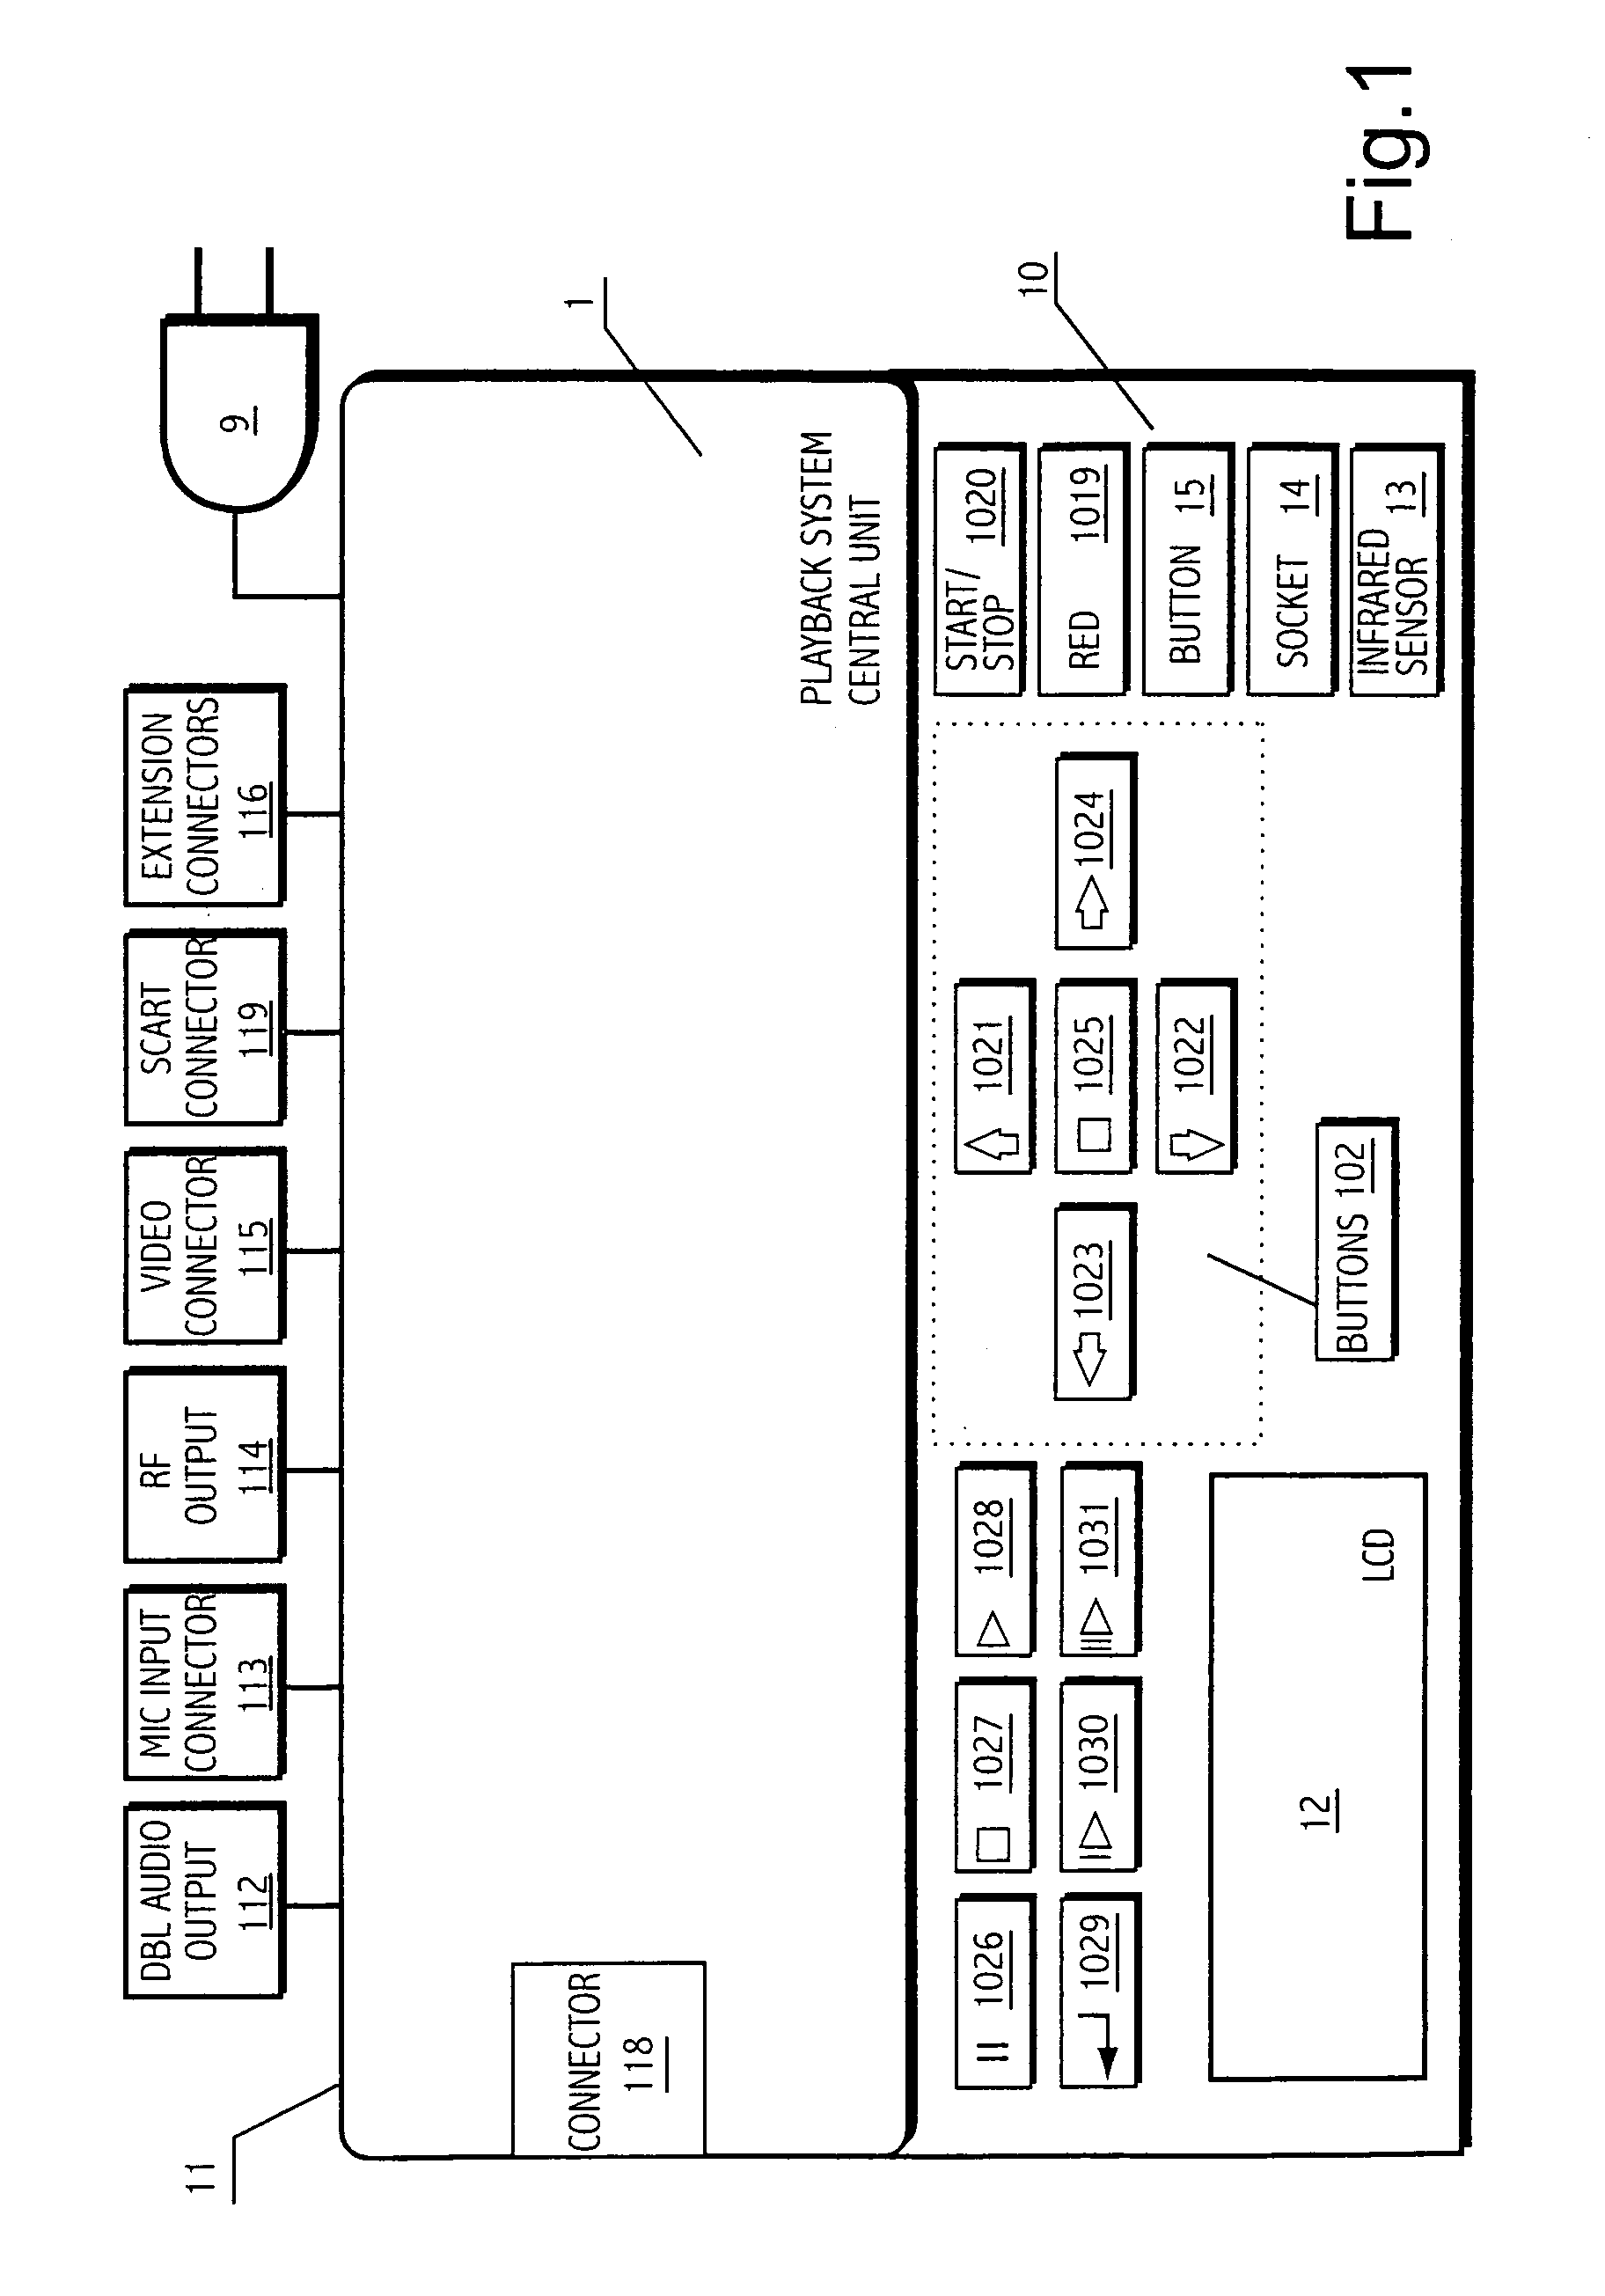 Home digital audiovisual information recording and playback system